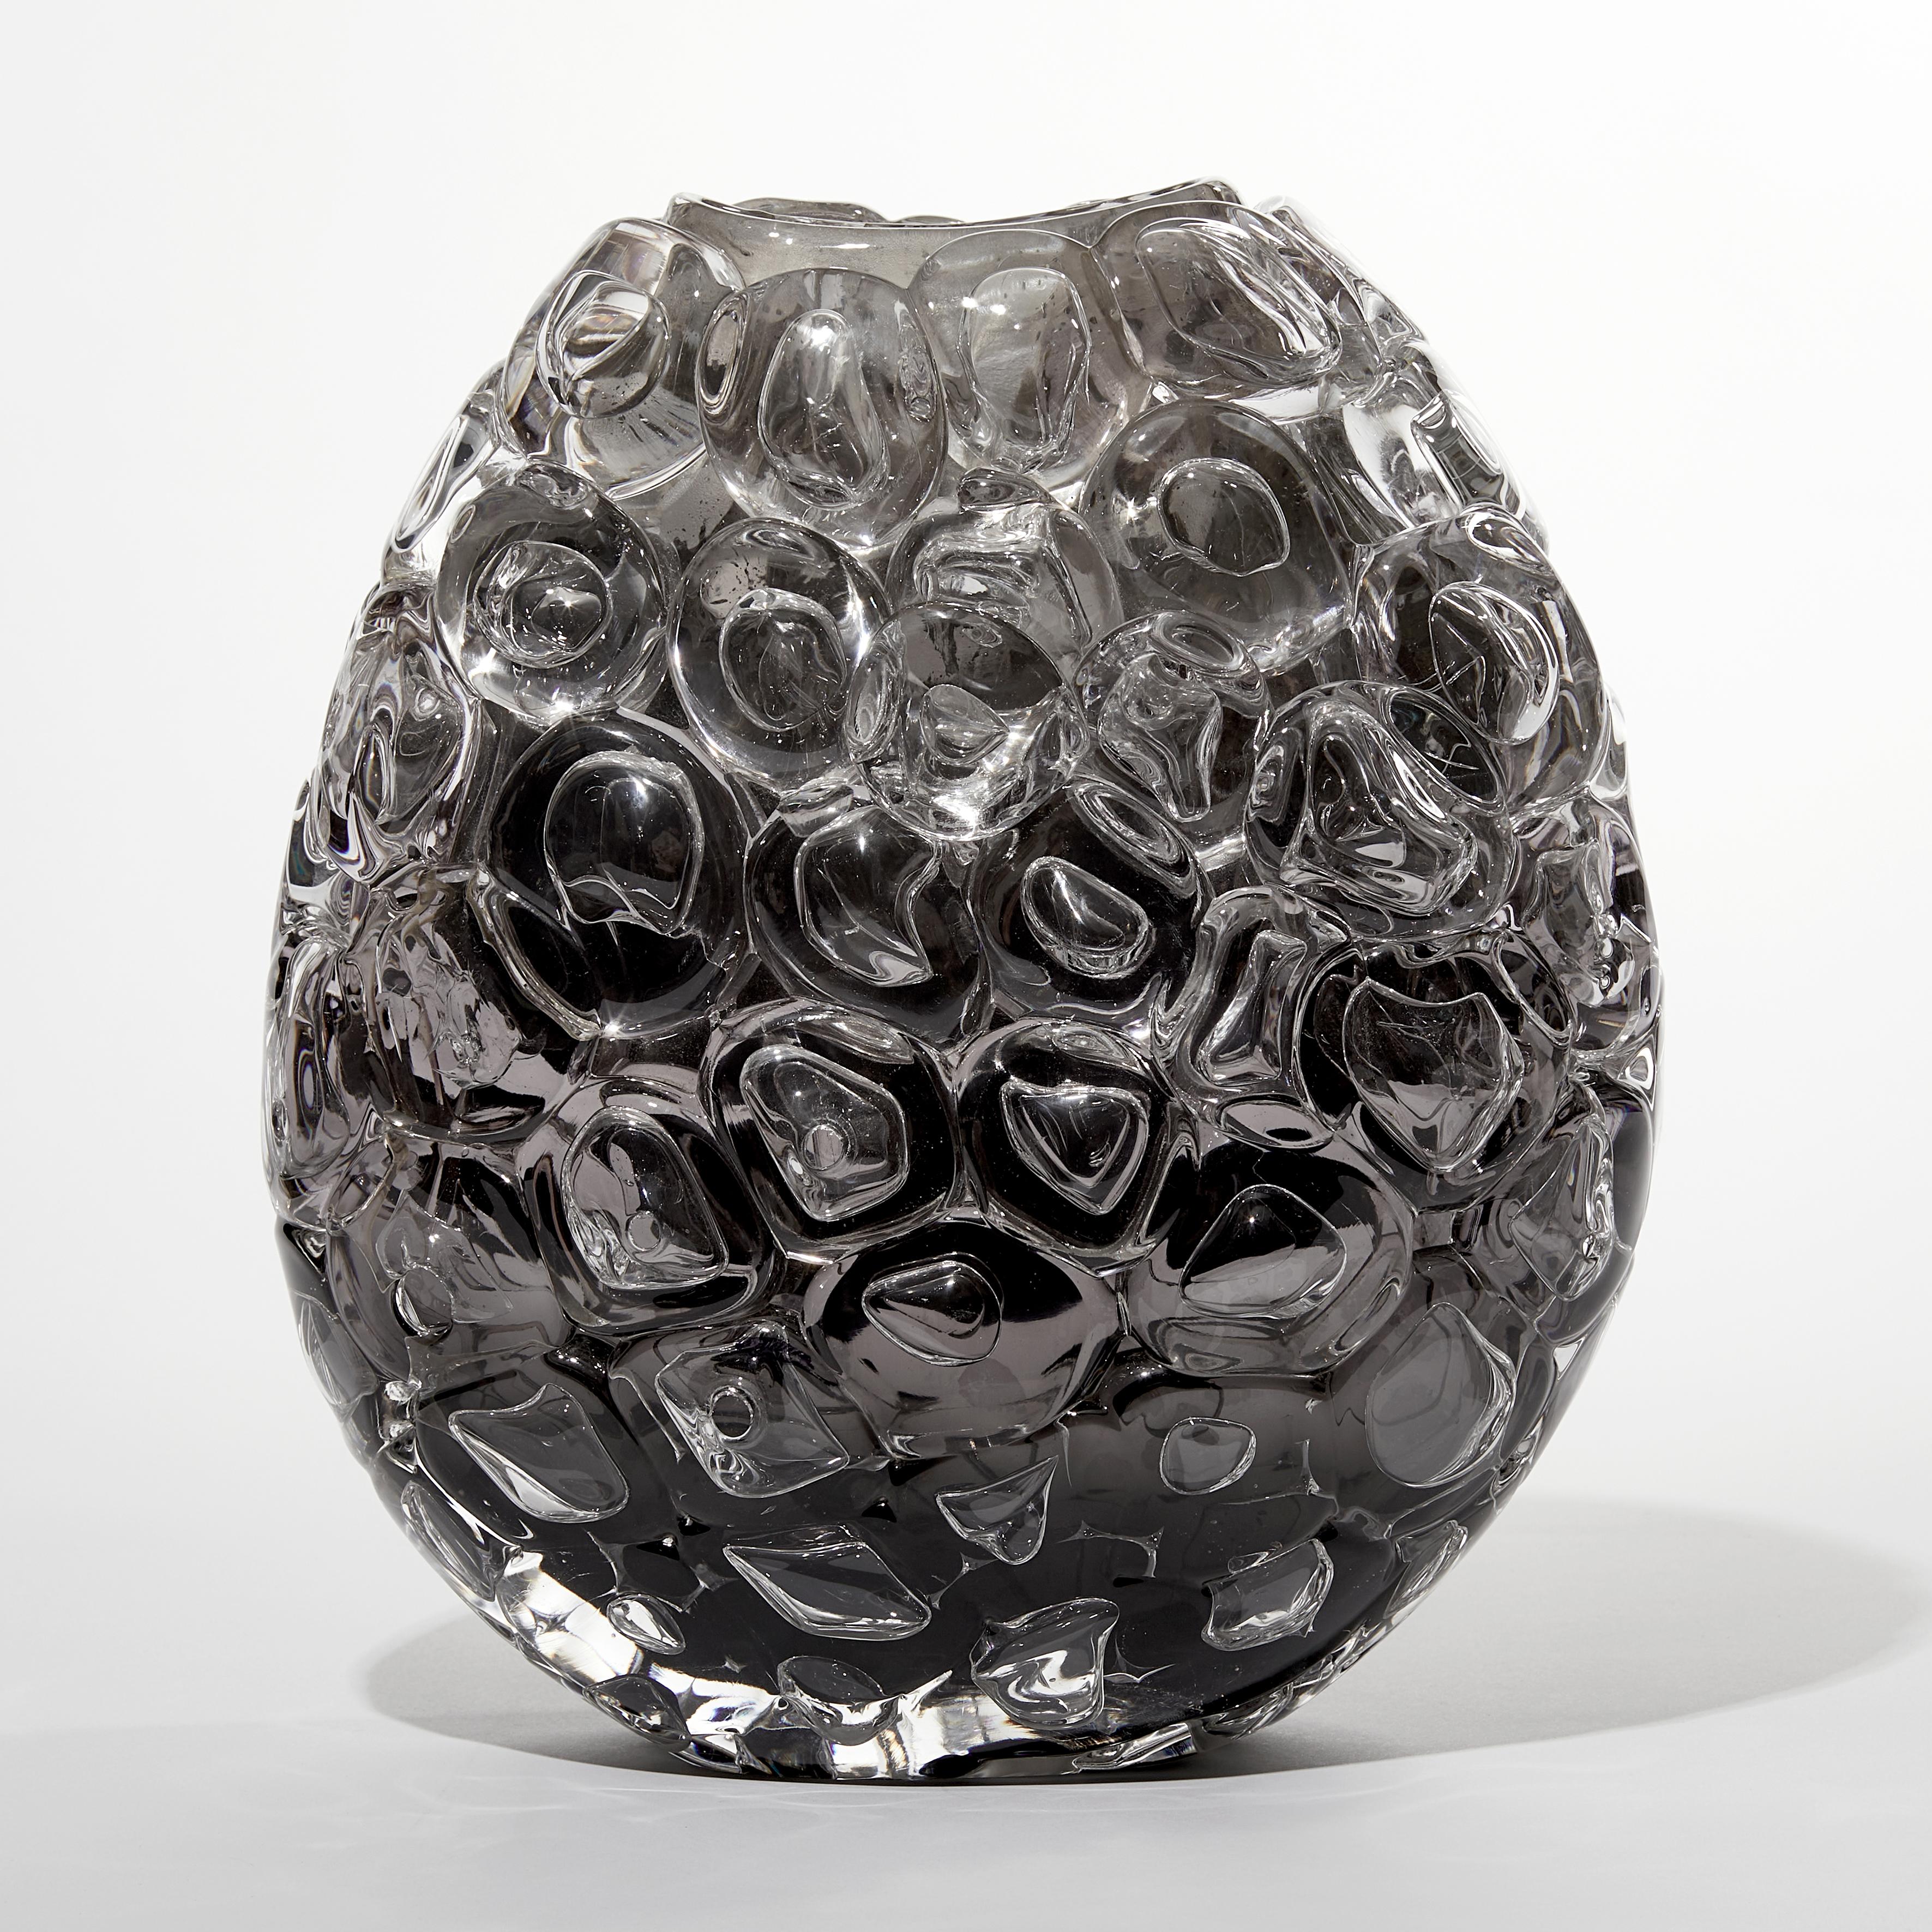 Bubblewrap in Monochrome I, a Silver and Clear Glass Vase by Allister Malcolm 1